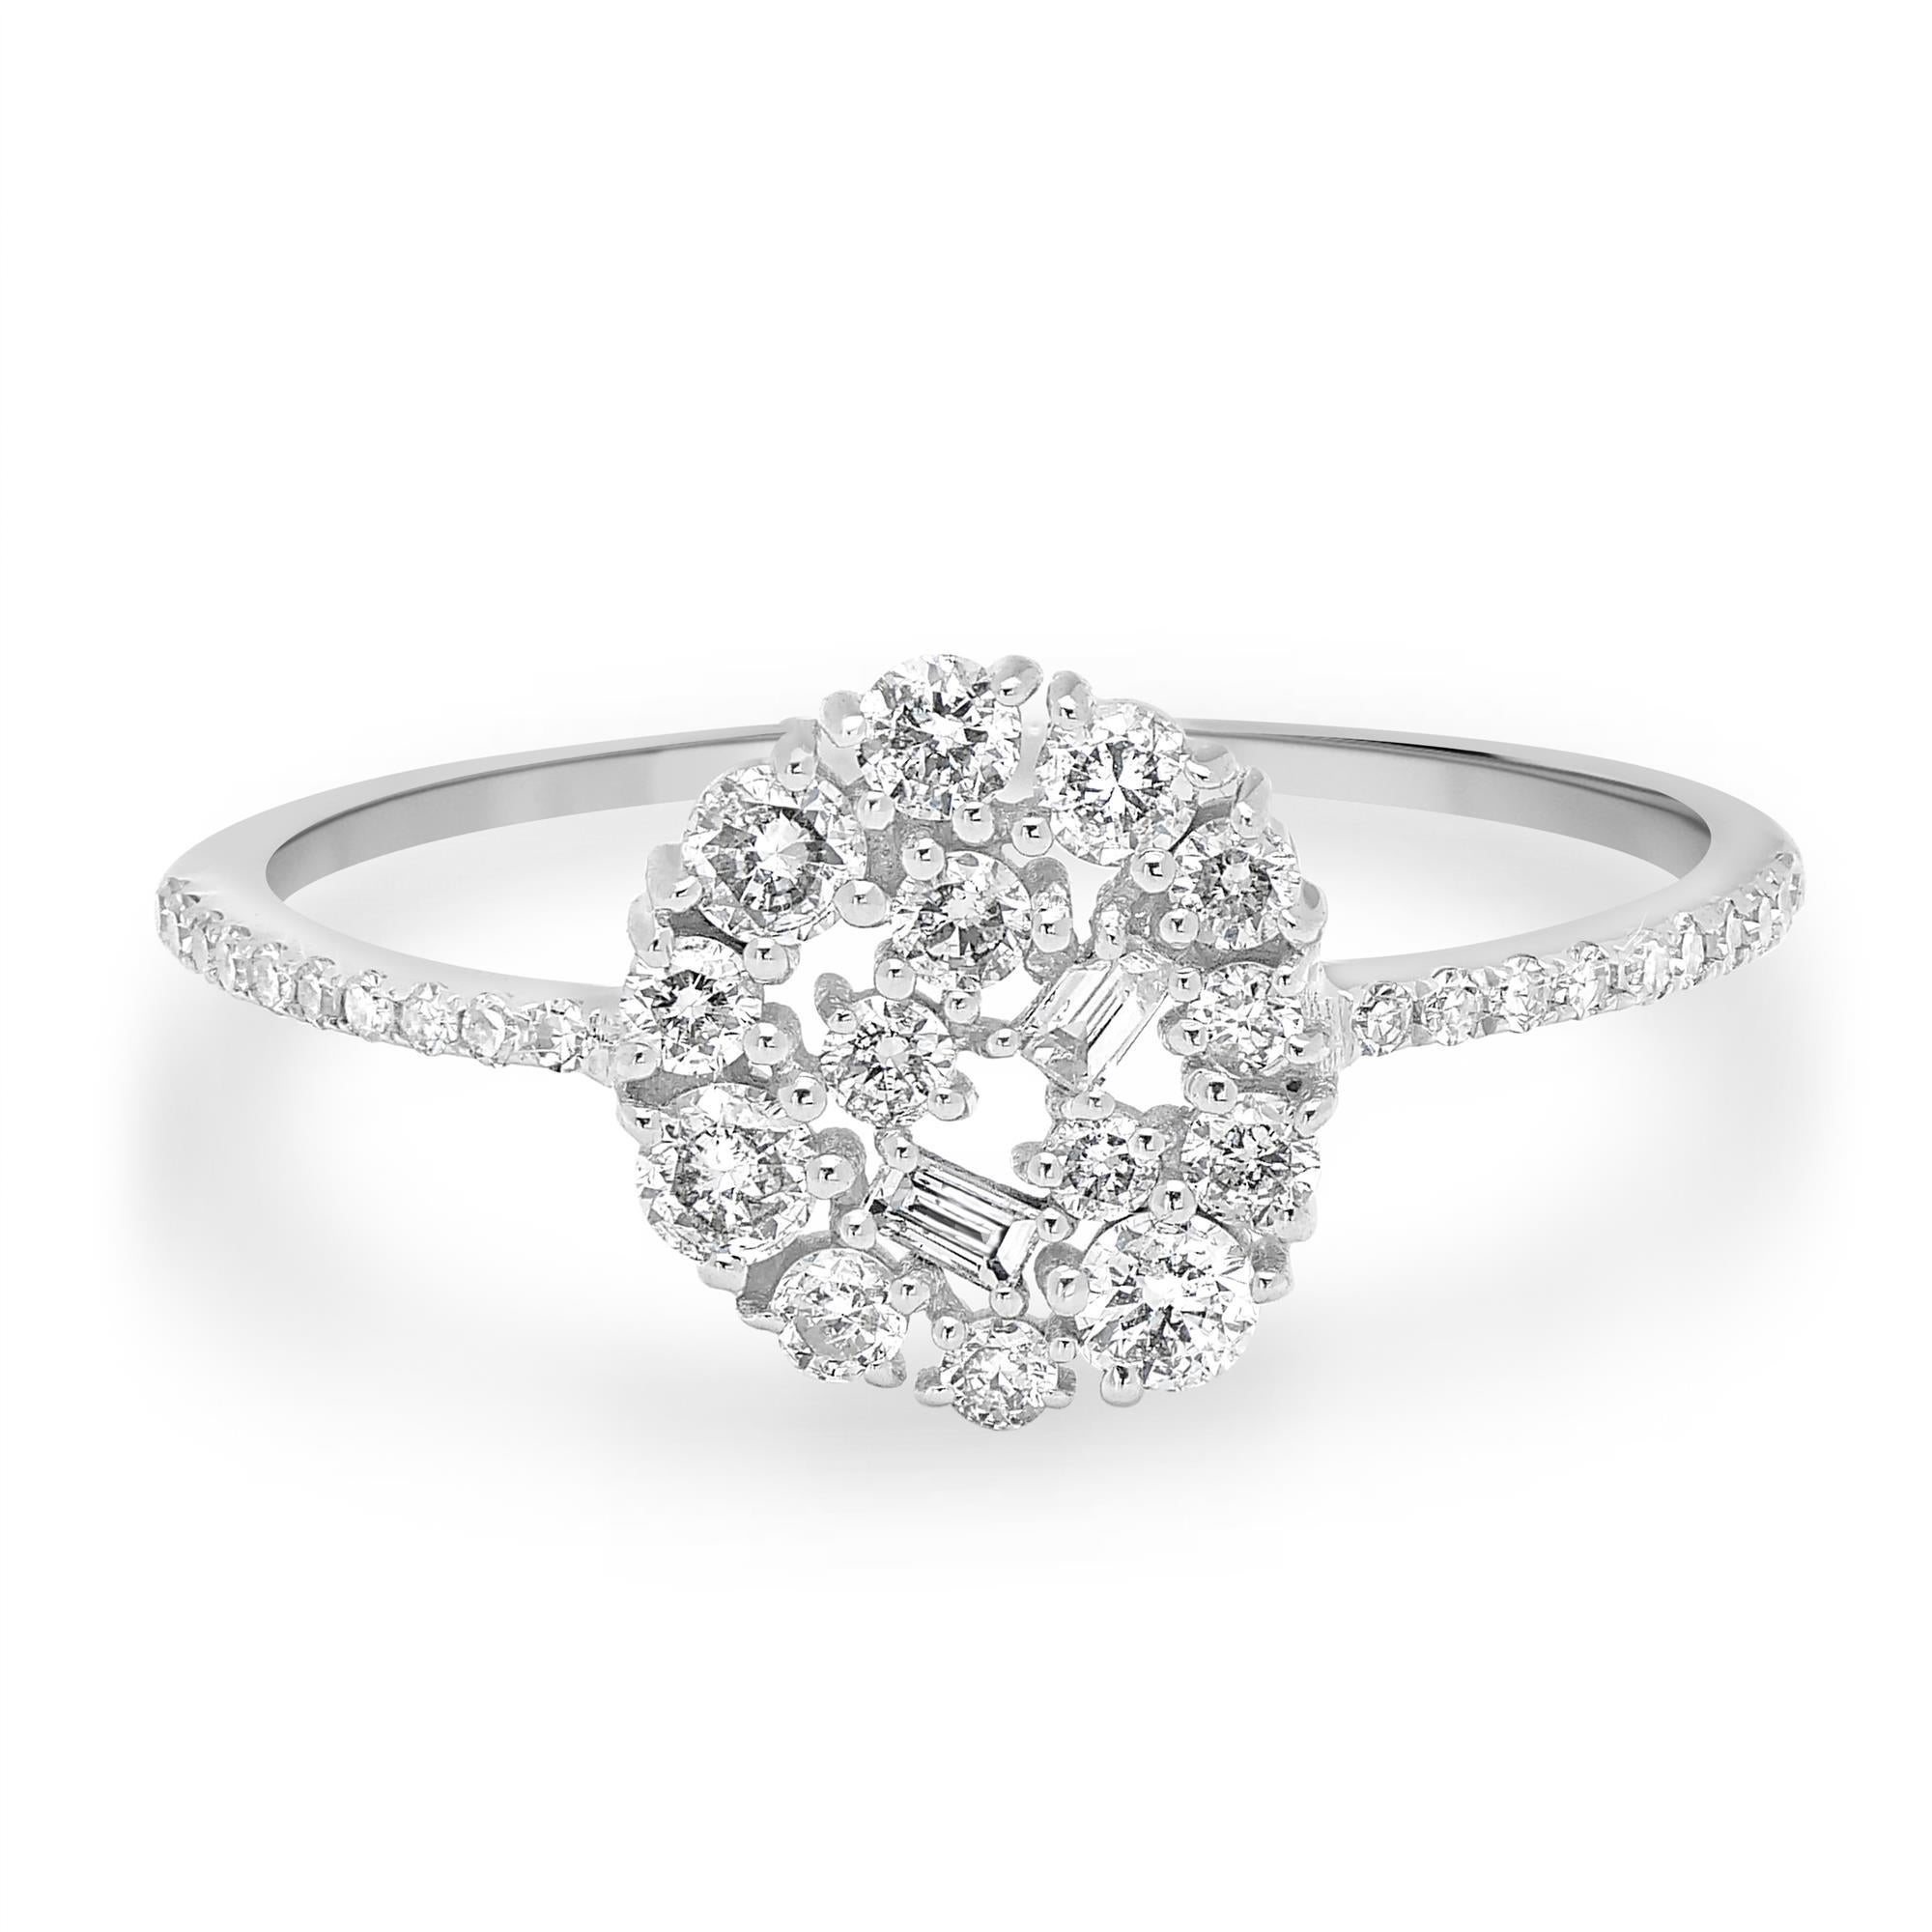 For Sale:  Luxle 3/8 Carat T.W. Diamond Cluster Ring in 14k White Gold 7